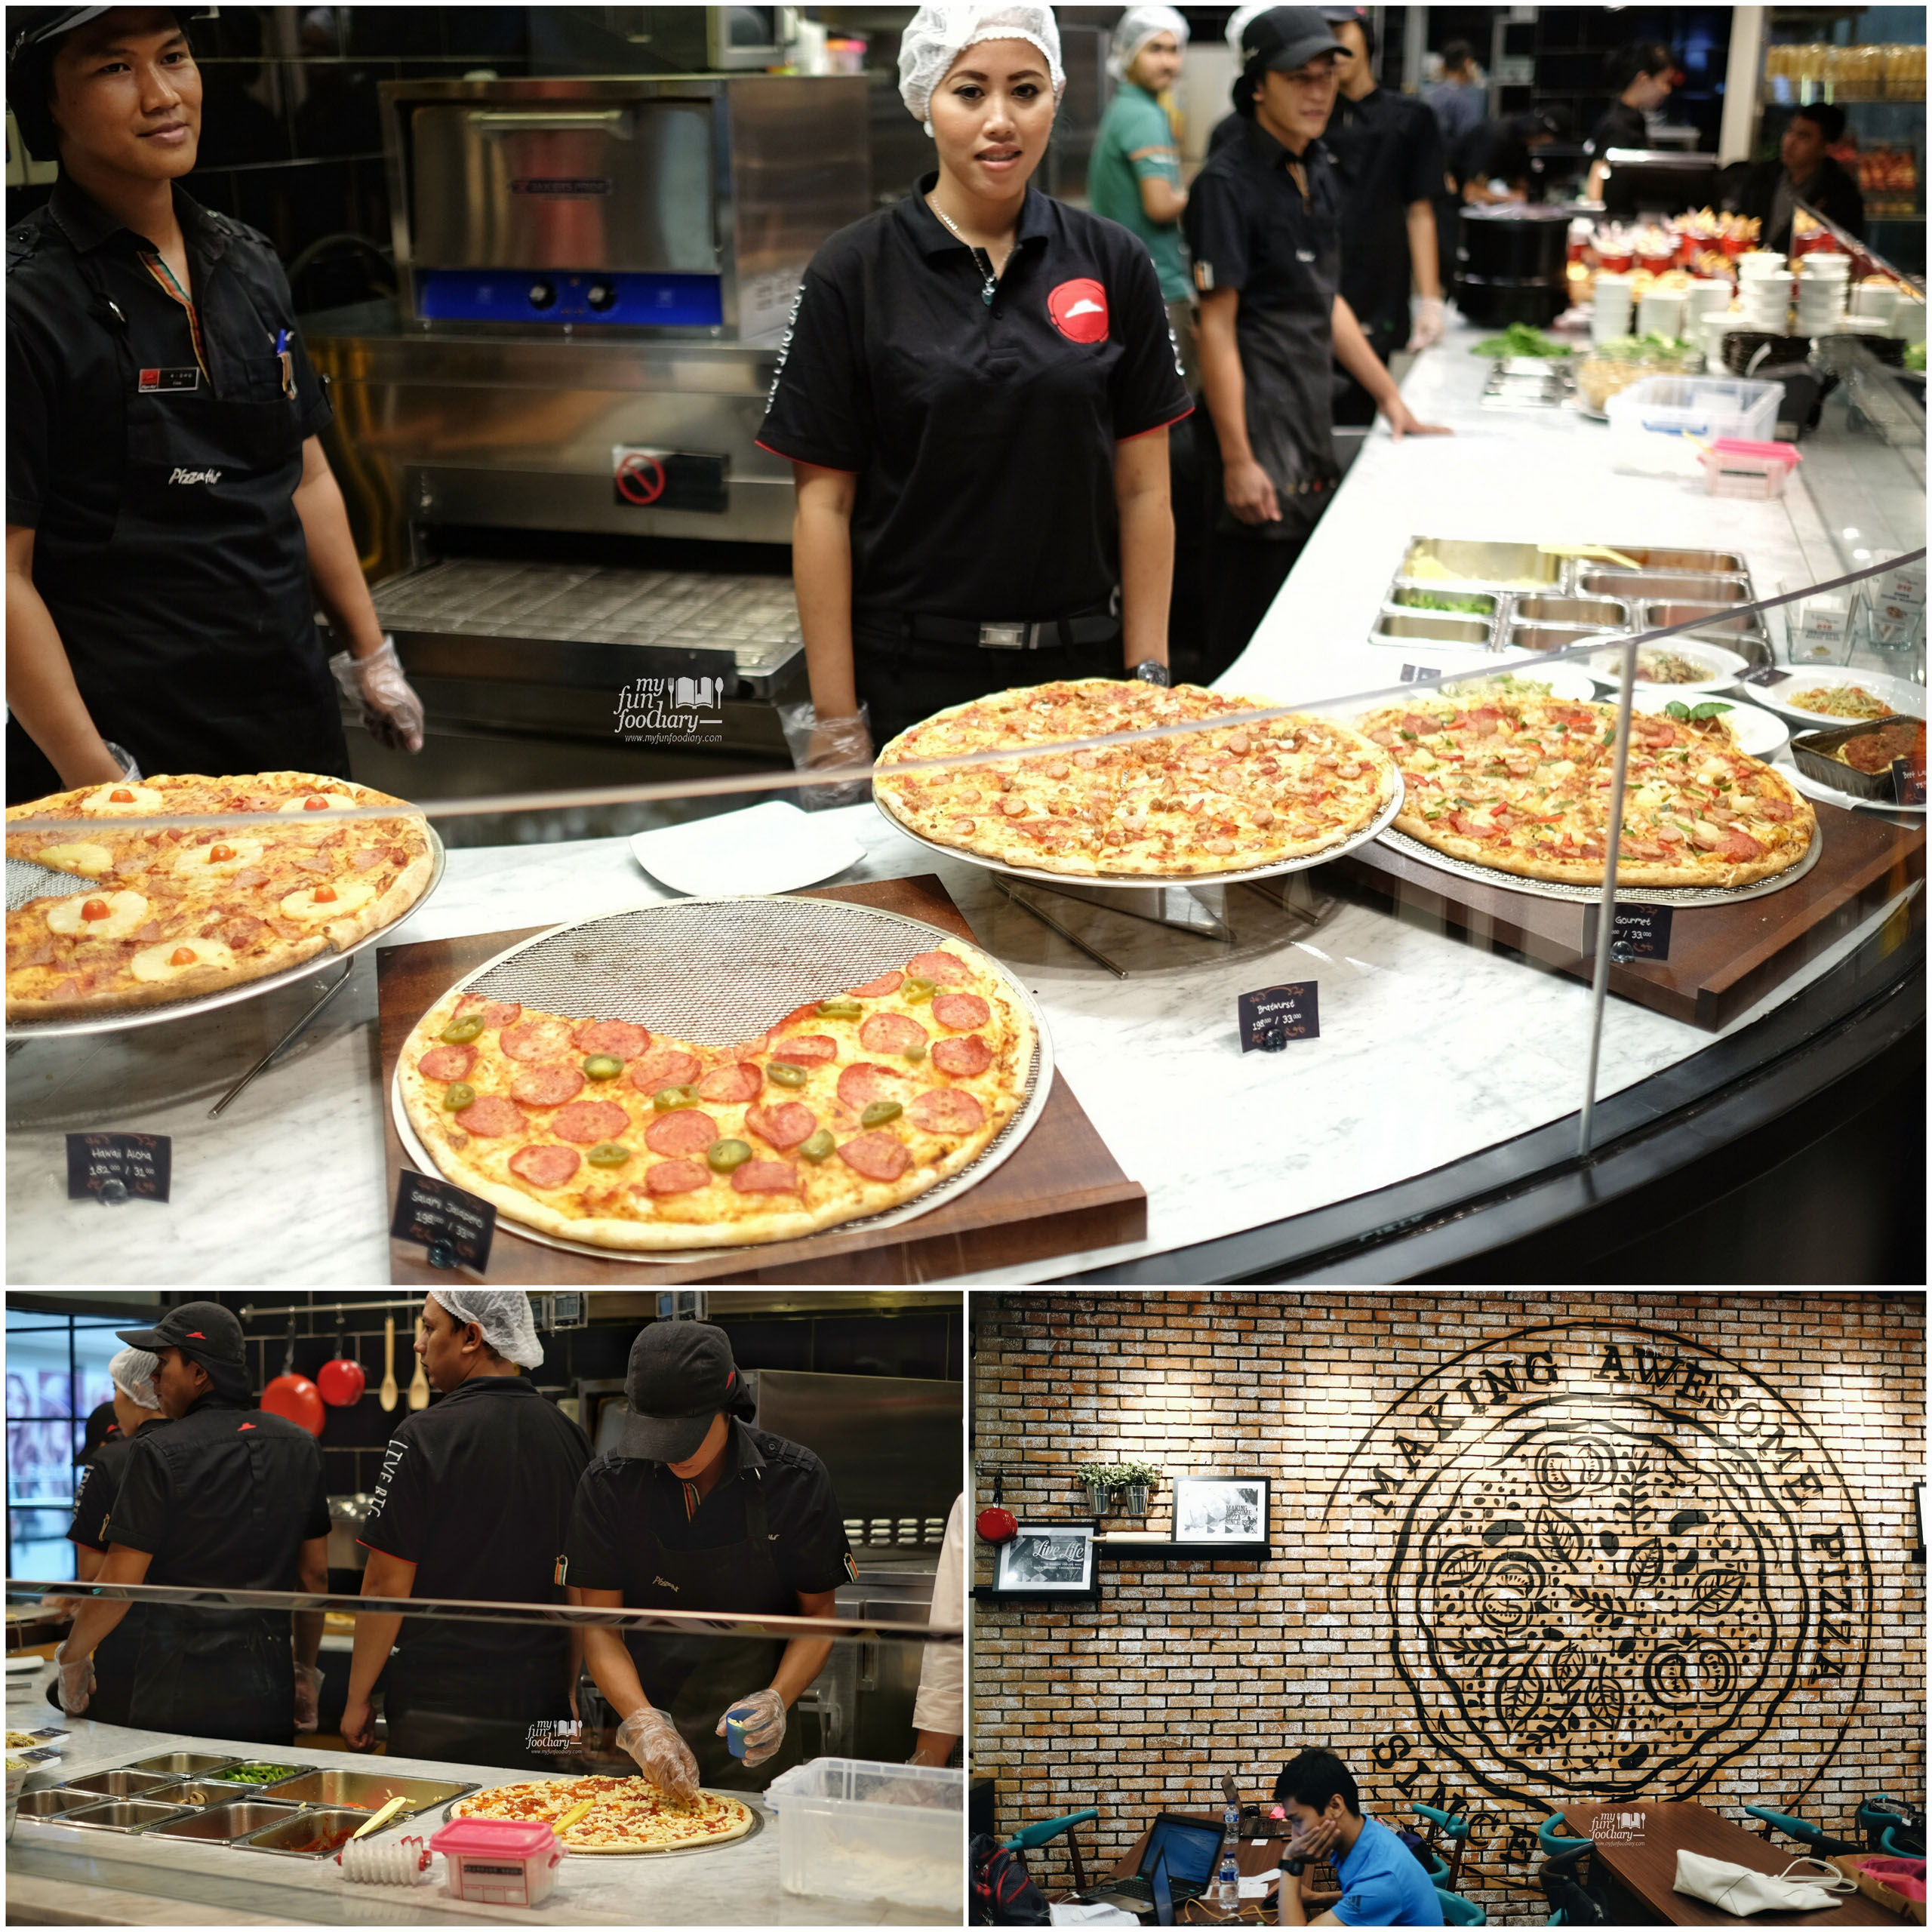 Display Counter at The Kitchen Pizza Hut by Myfunfoodiary